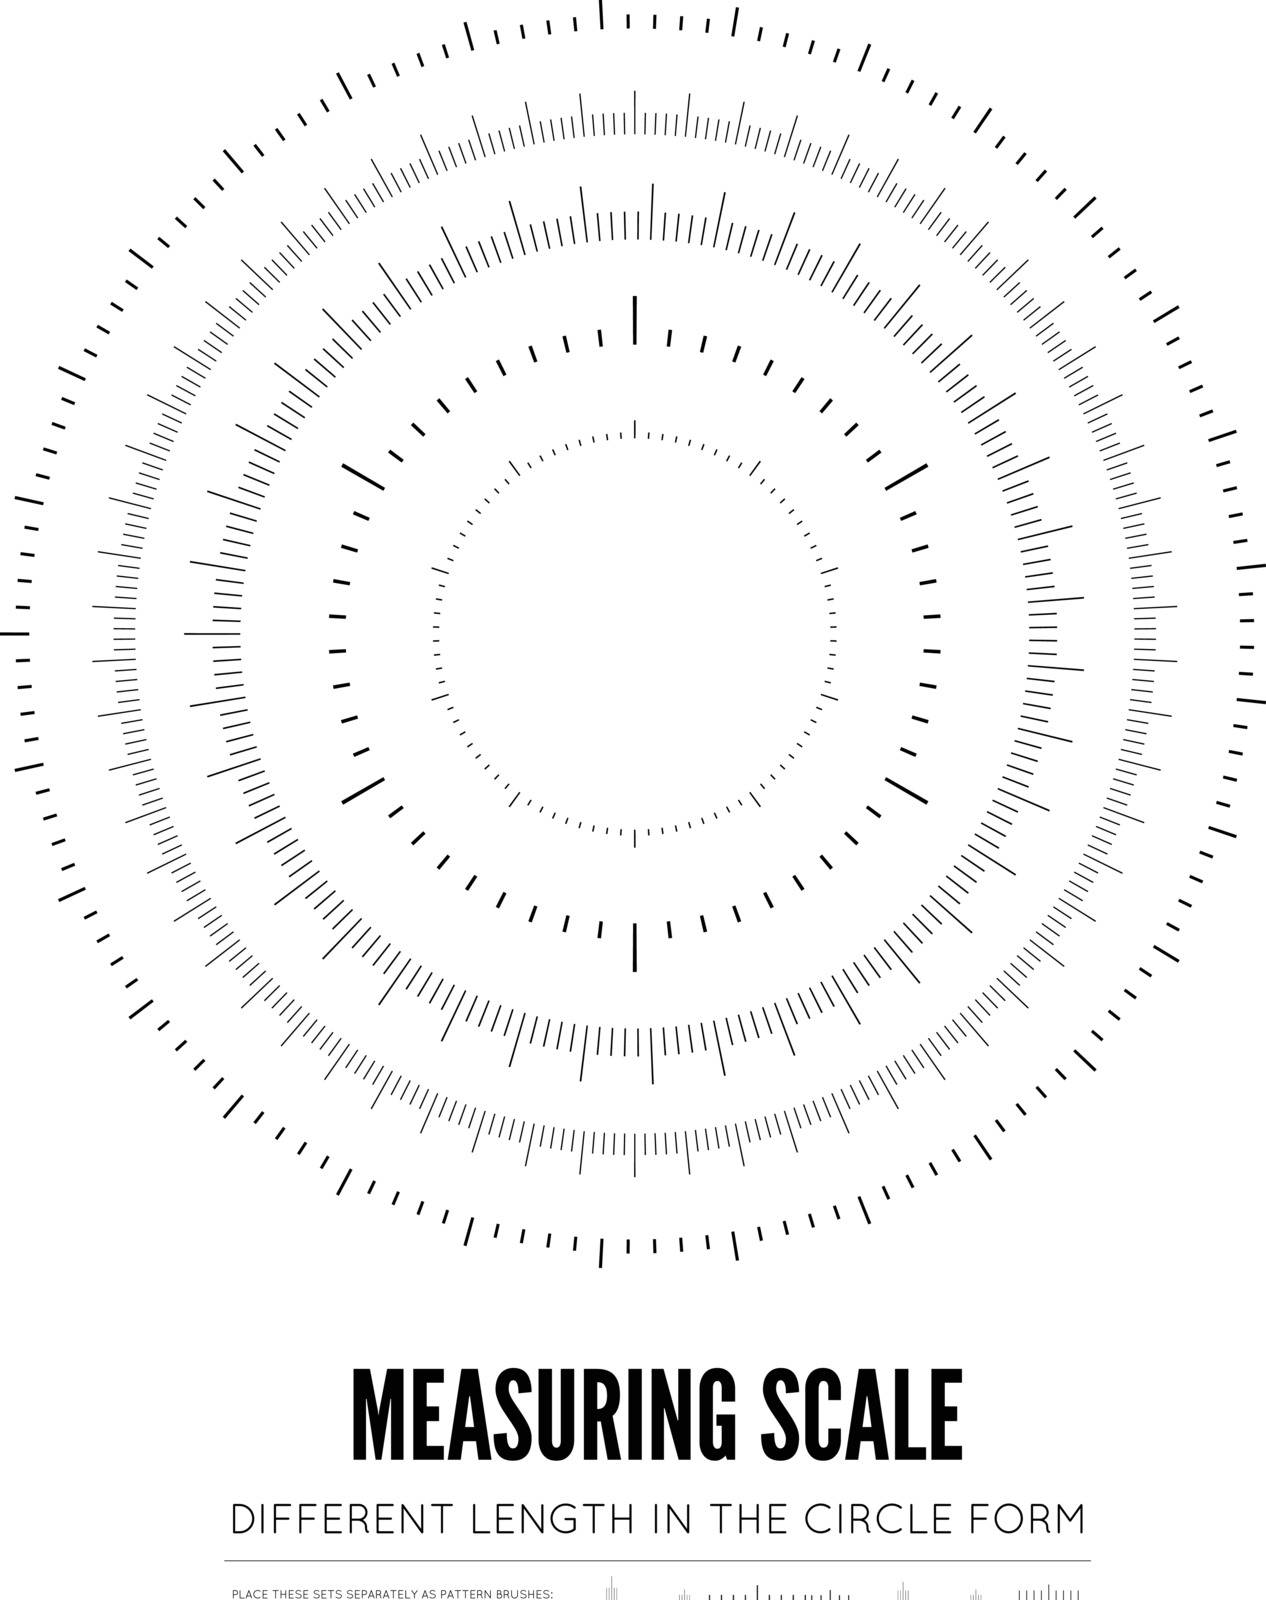 Measuring rulers of different scale, length and shape. Vector elements by sermax55